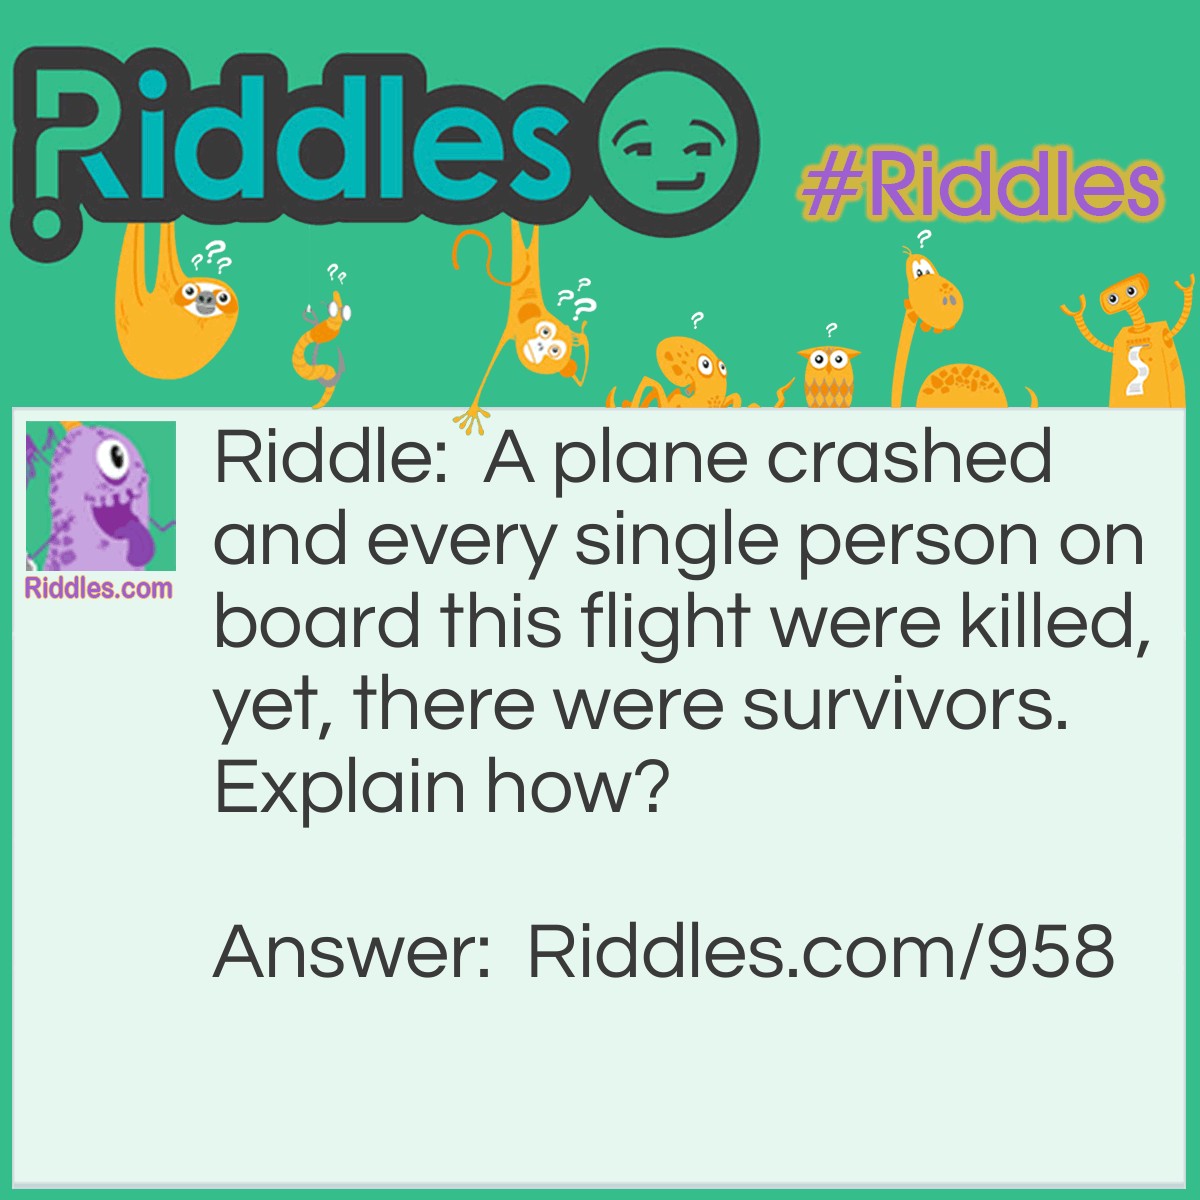 Riddle: A plane crashed and every single person on board this flight were killed, yet, there were survivors.
Explain how? Answer: The married people lived; the singles died.